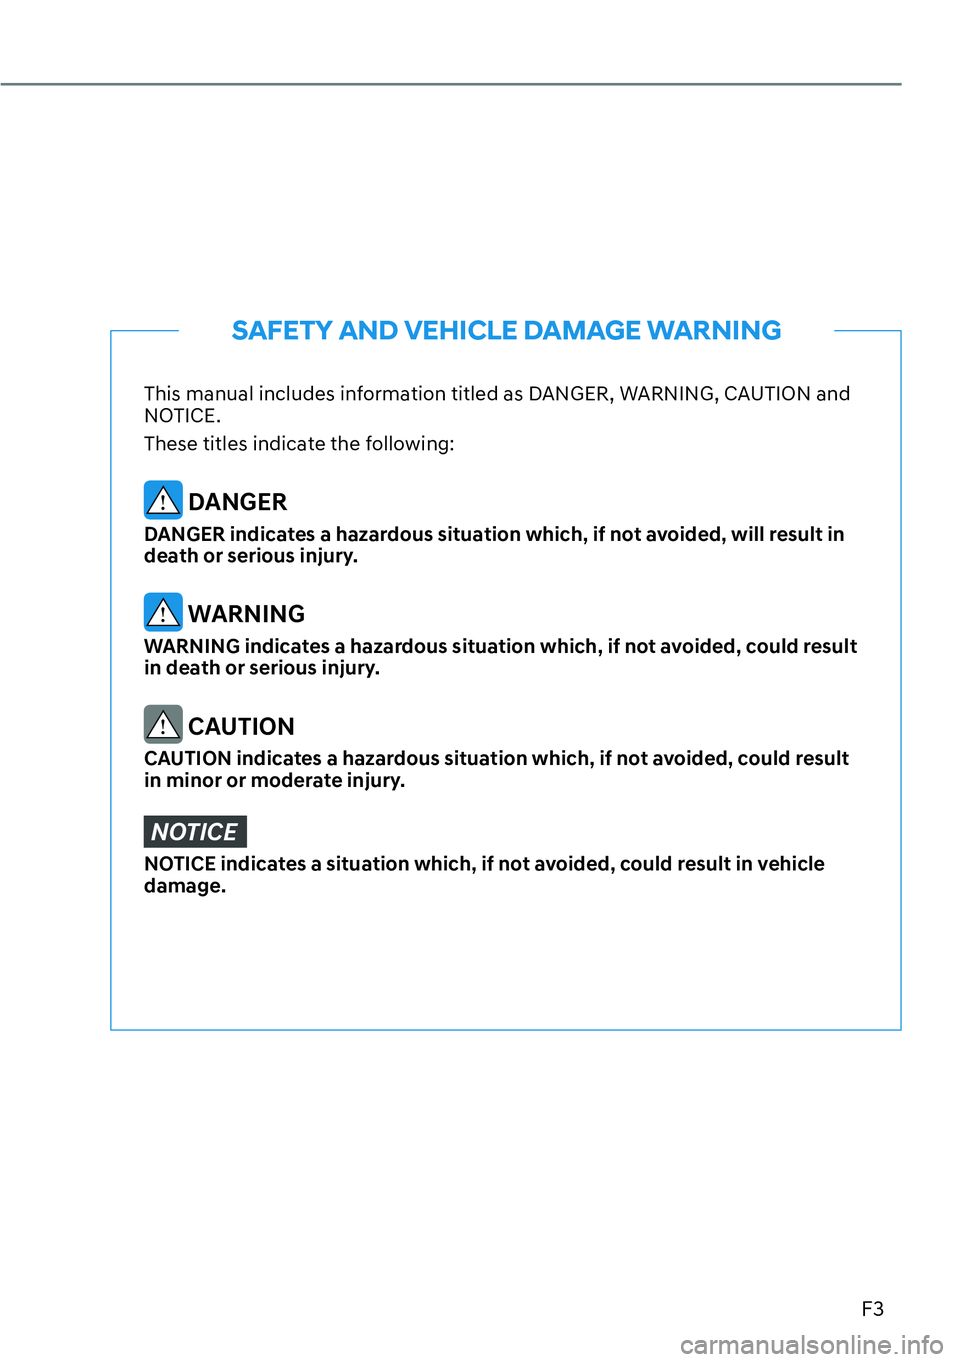 HYUNDAI KONA 2023  Owners Manual F3
This manual includes information titled as DANGER, WARNING, CAUTION and 
NOTICE.
These titles indicate the following:
 DANGER
DANGER indicates a hazardous situation which, if not avoided, will resu